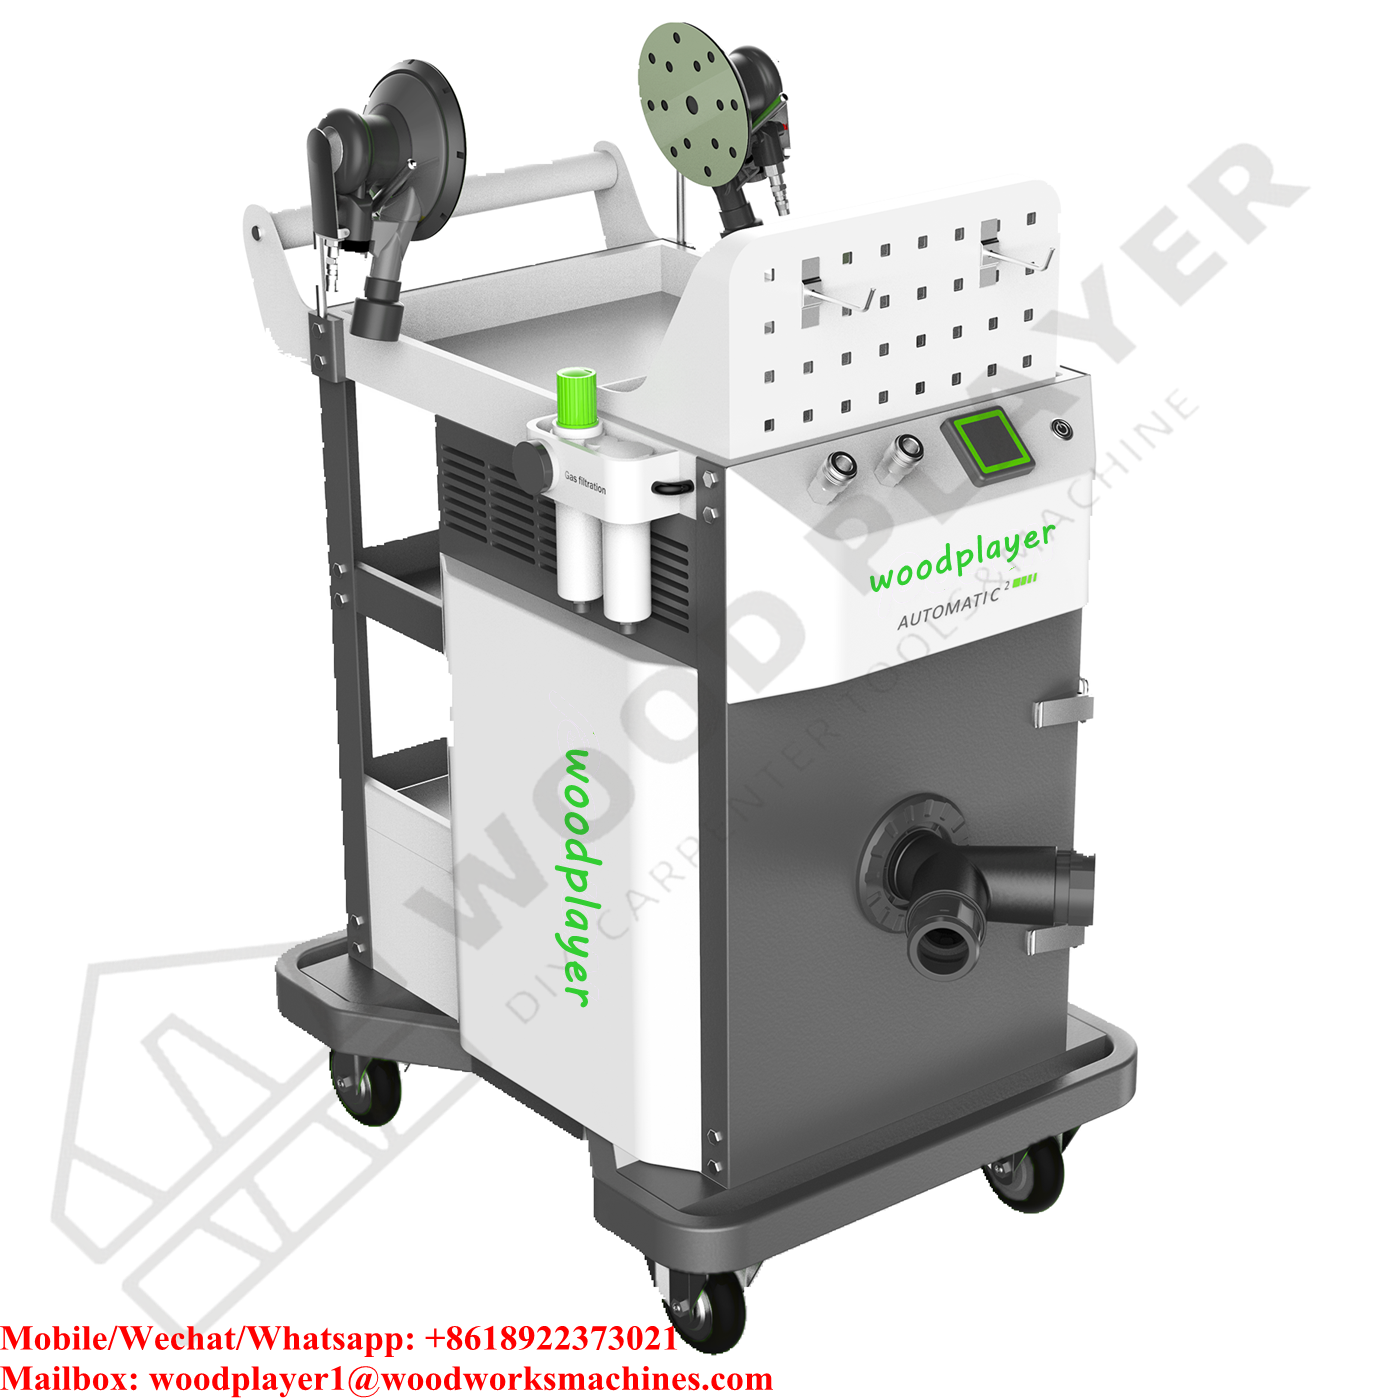 Mobile Dust-Free Dry Grinding And Dust Suction Host (Electrical Dual Purpose)